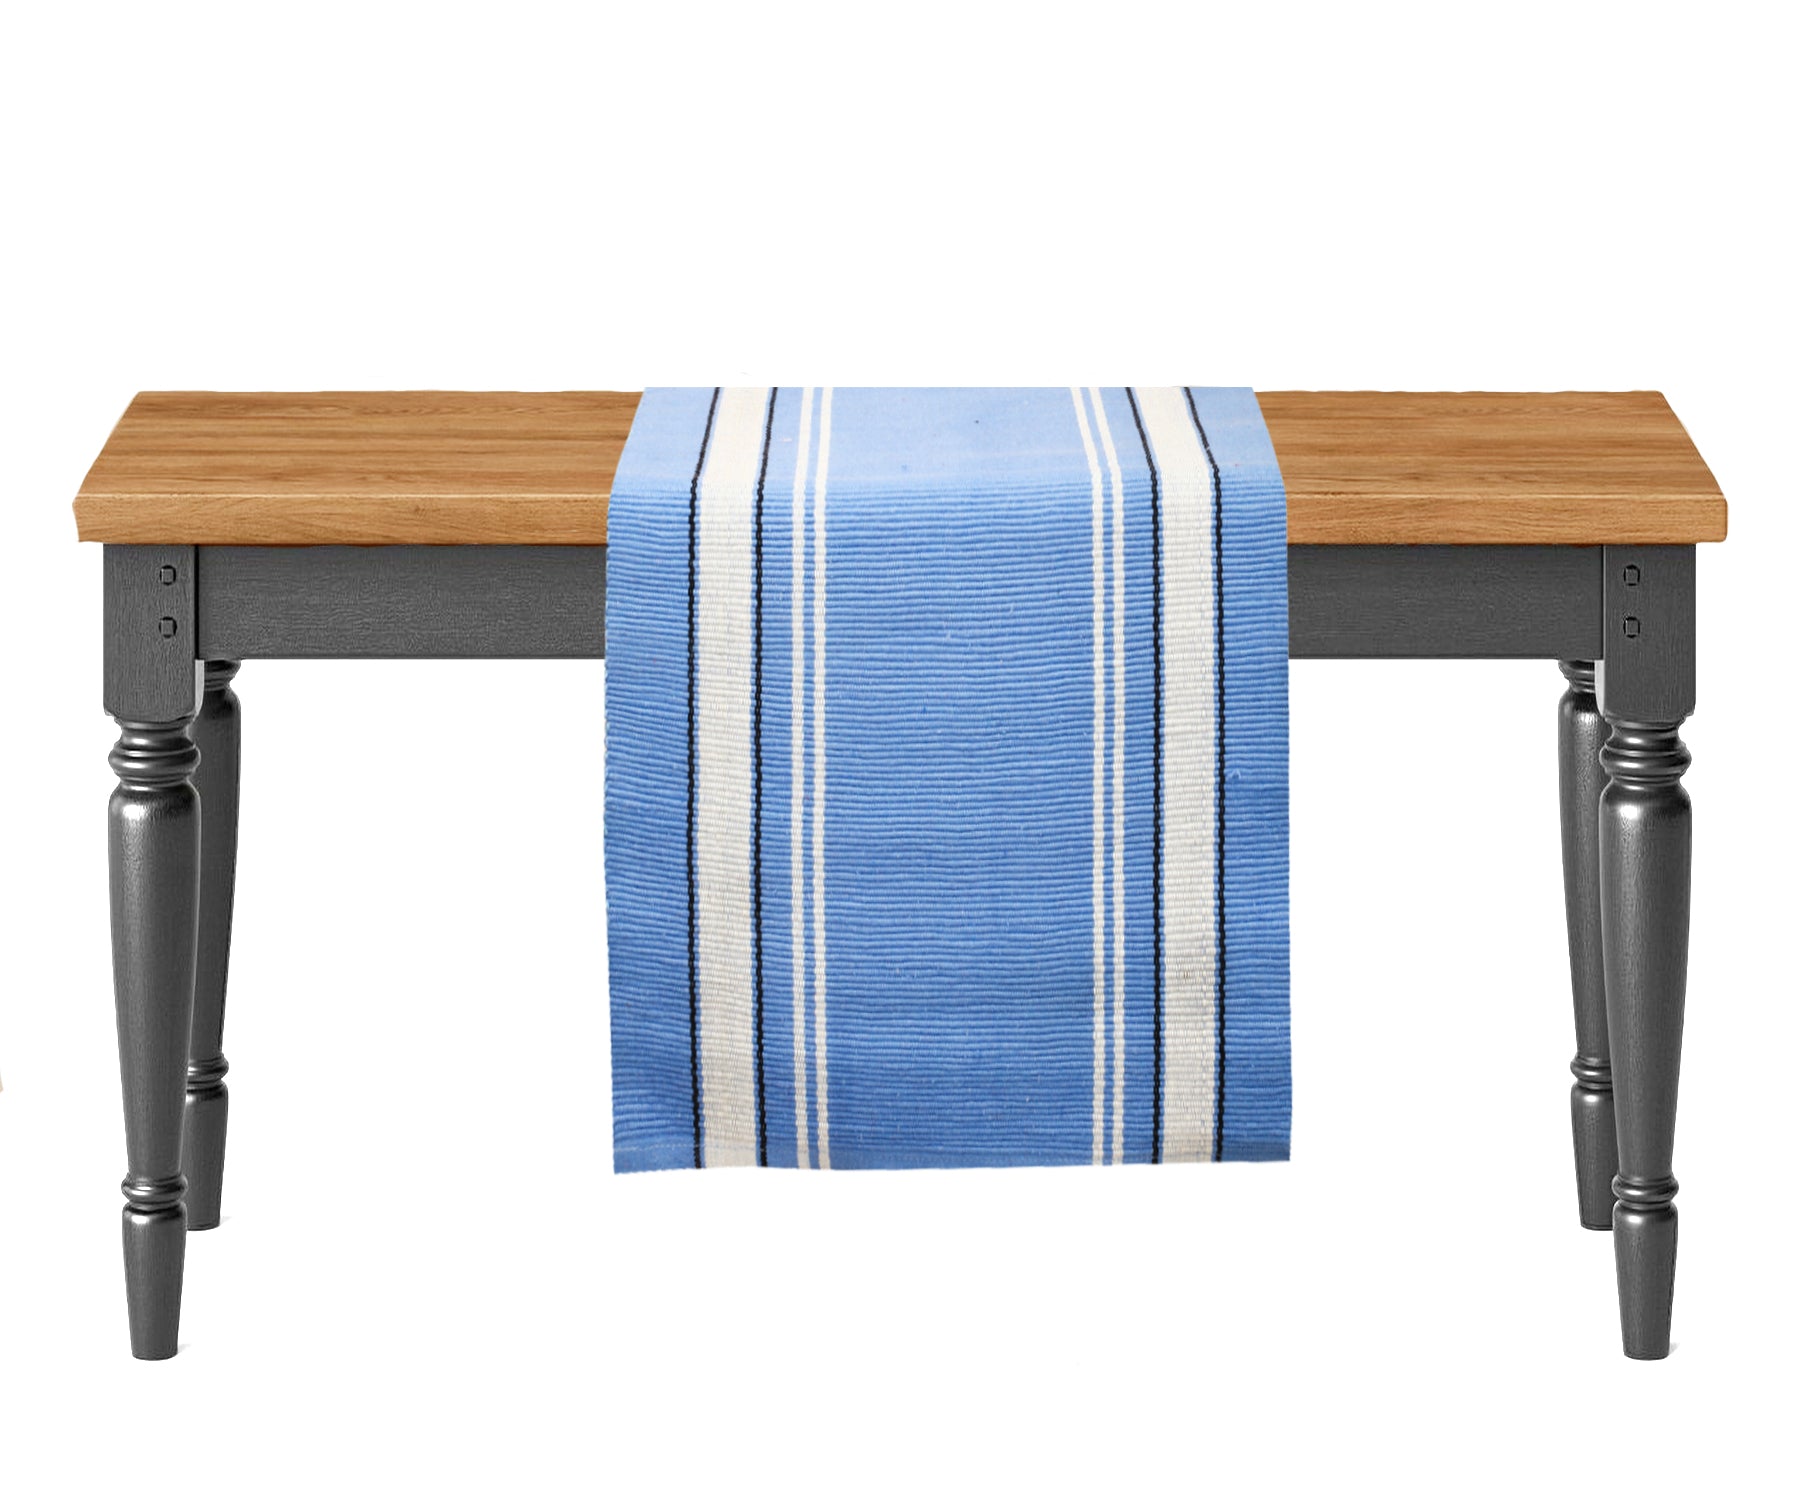 Enhance your decor with a classic farmhouse table runner, perfect for casual or formal gatherings.